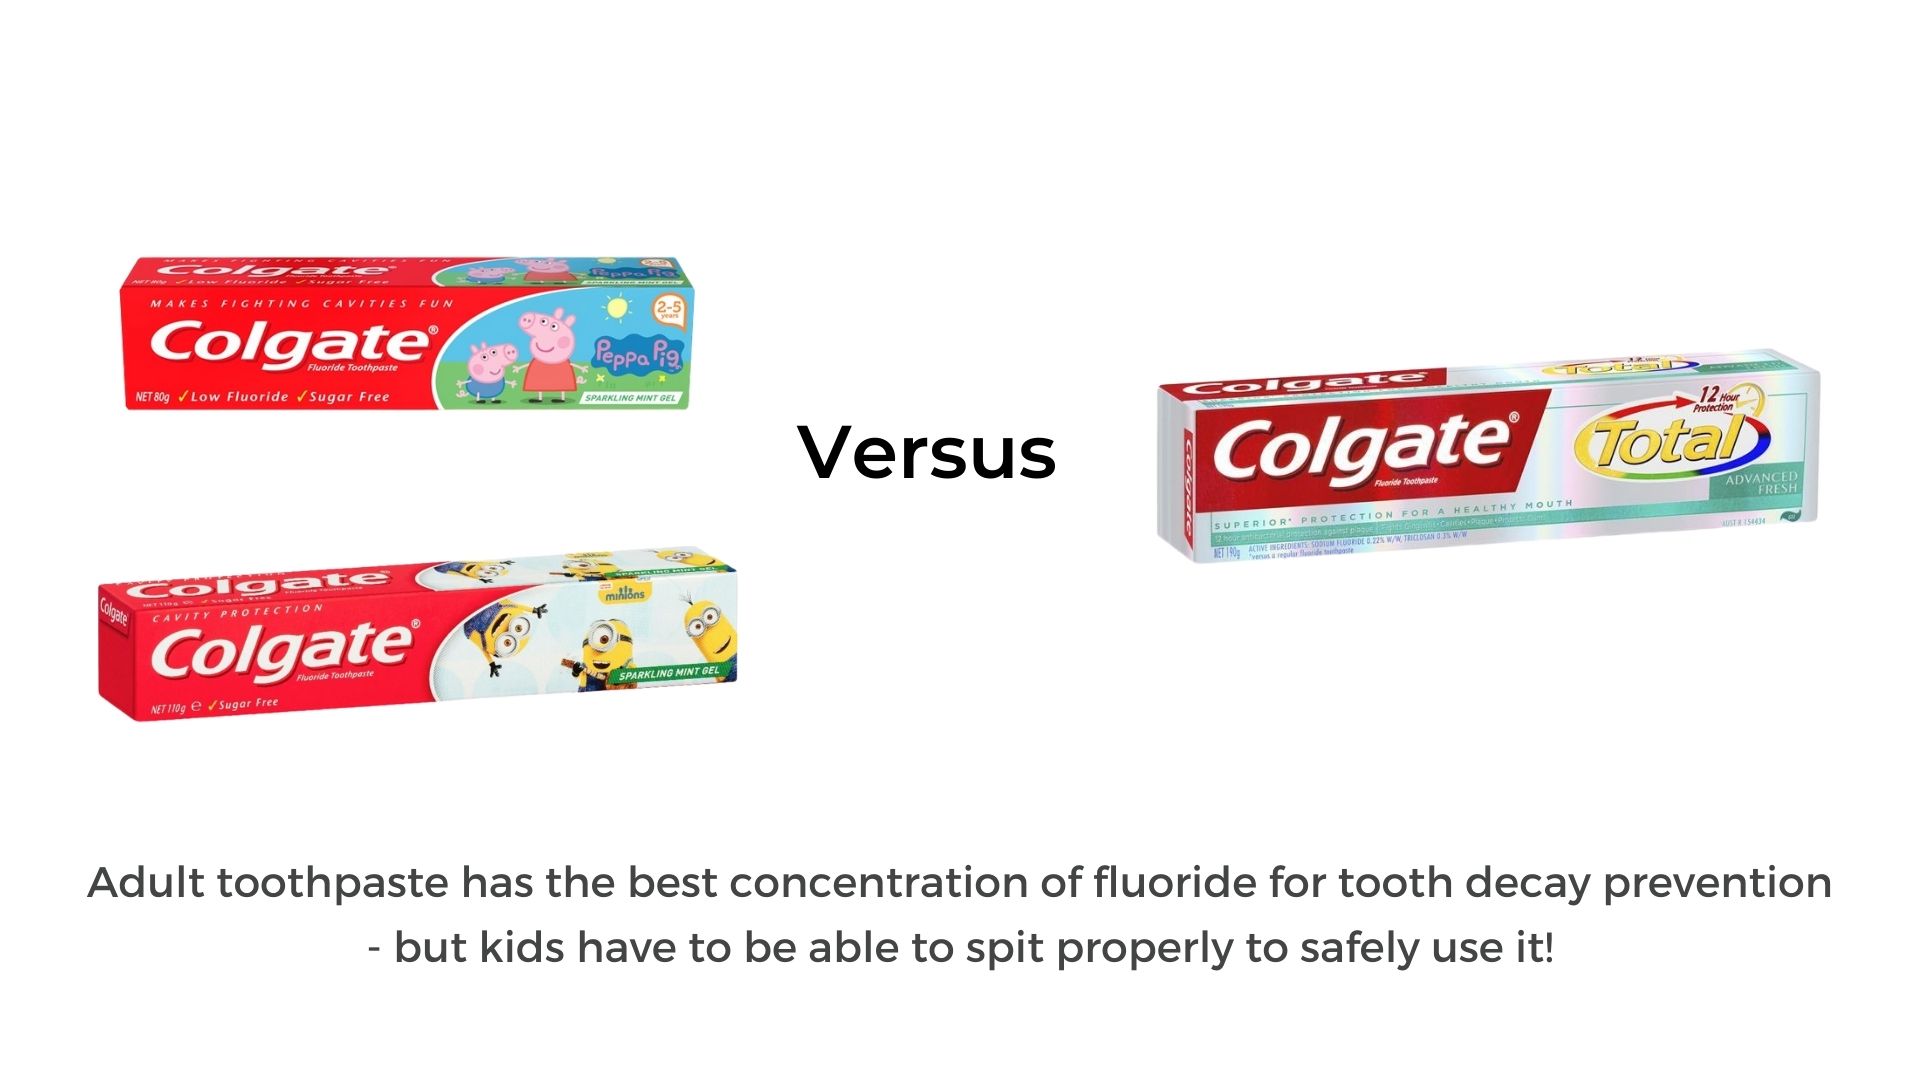 toothpaste for kids does not have as much fluoride in it as adult toothpaste